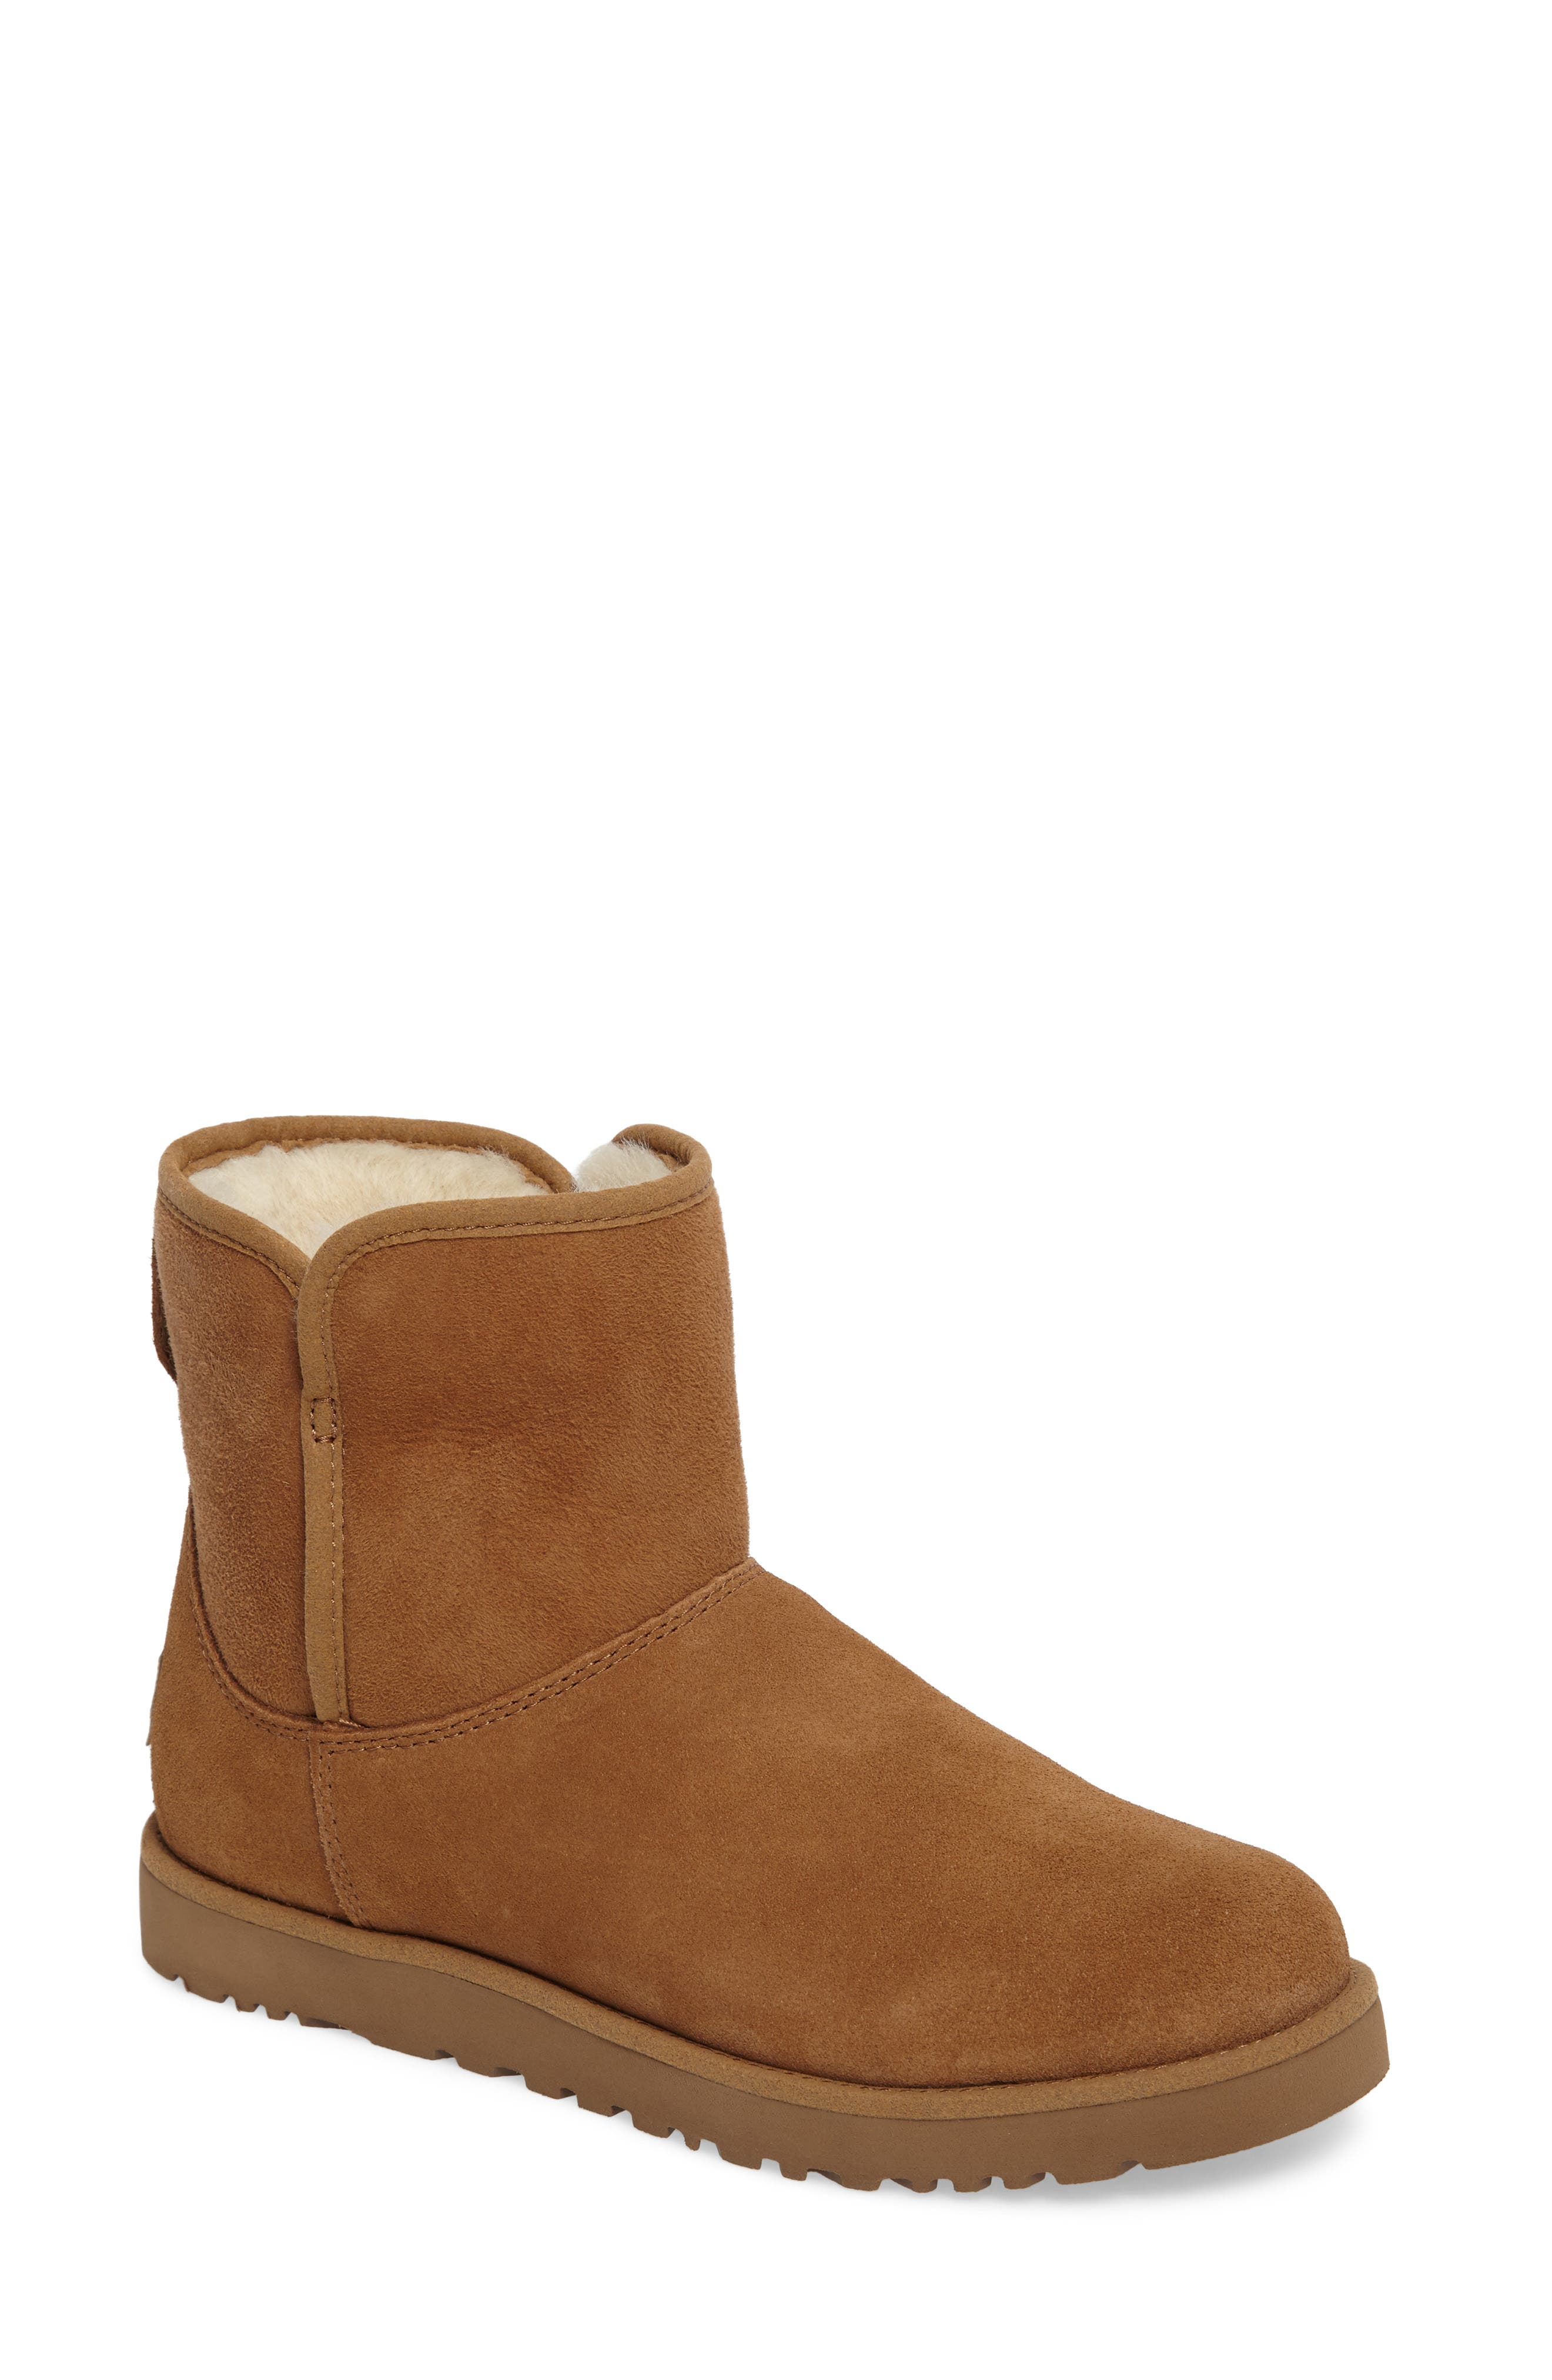 nordstrom ugg boots womens